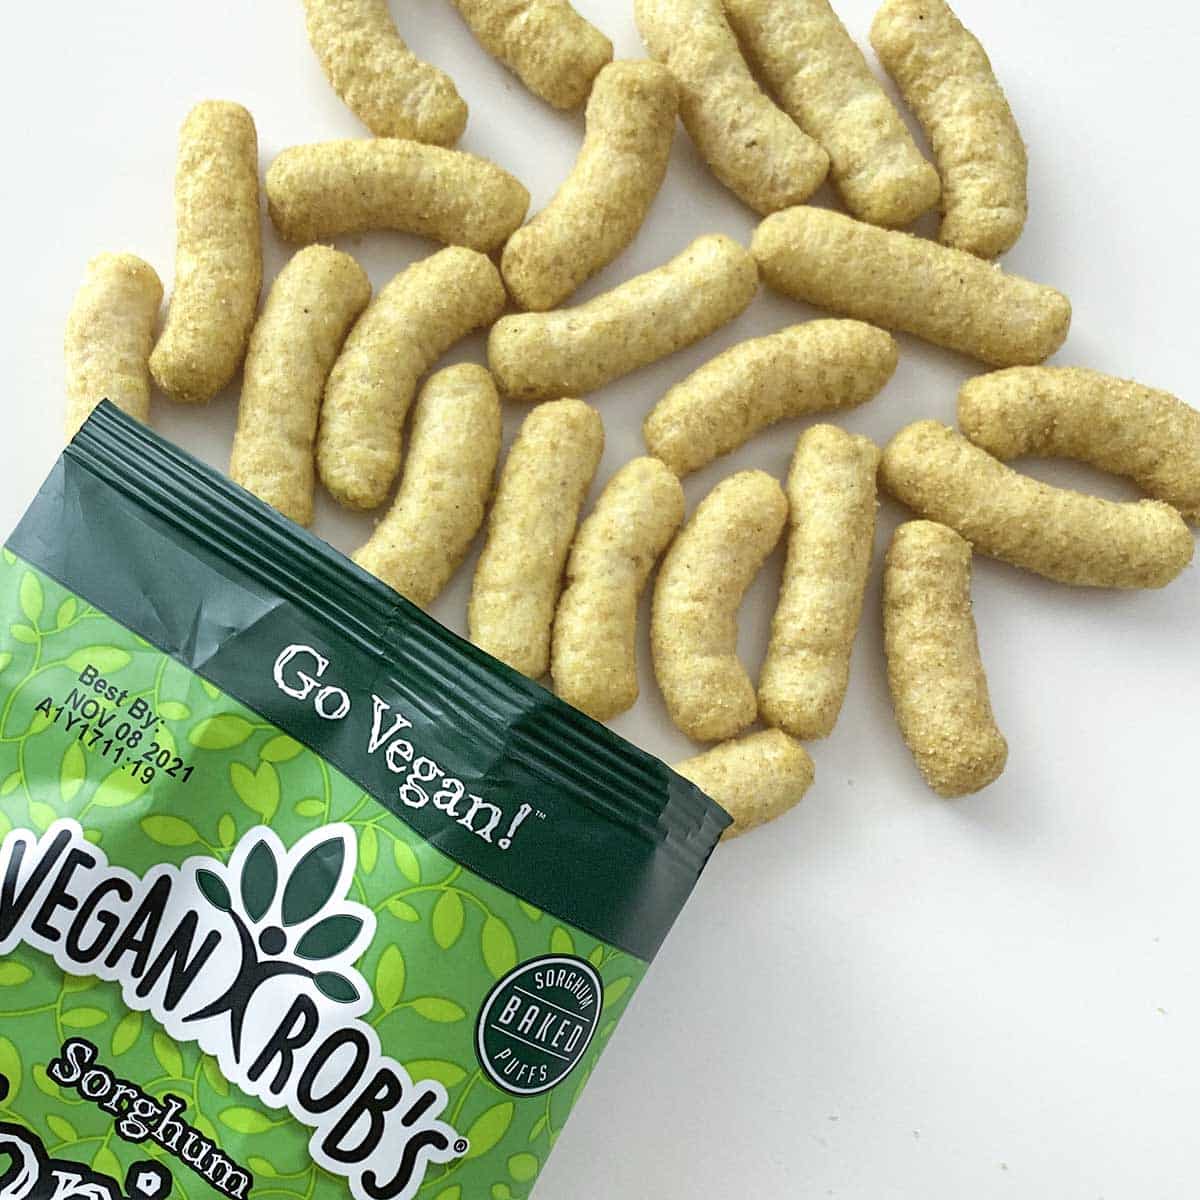 bag of Vegan Rob's puffs on a white table